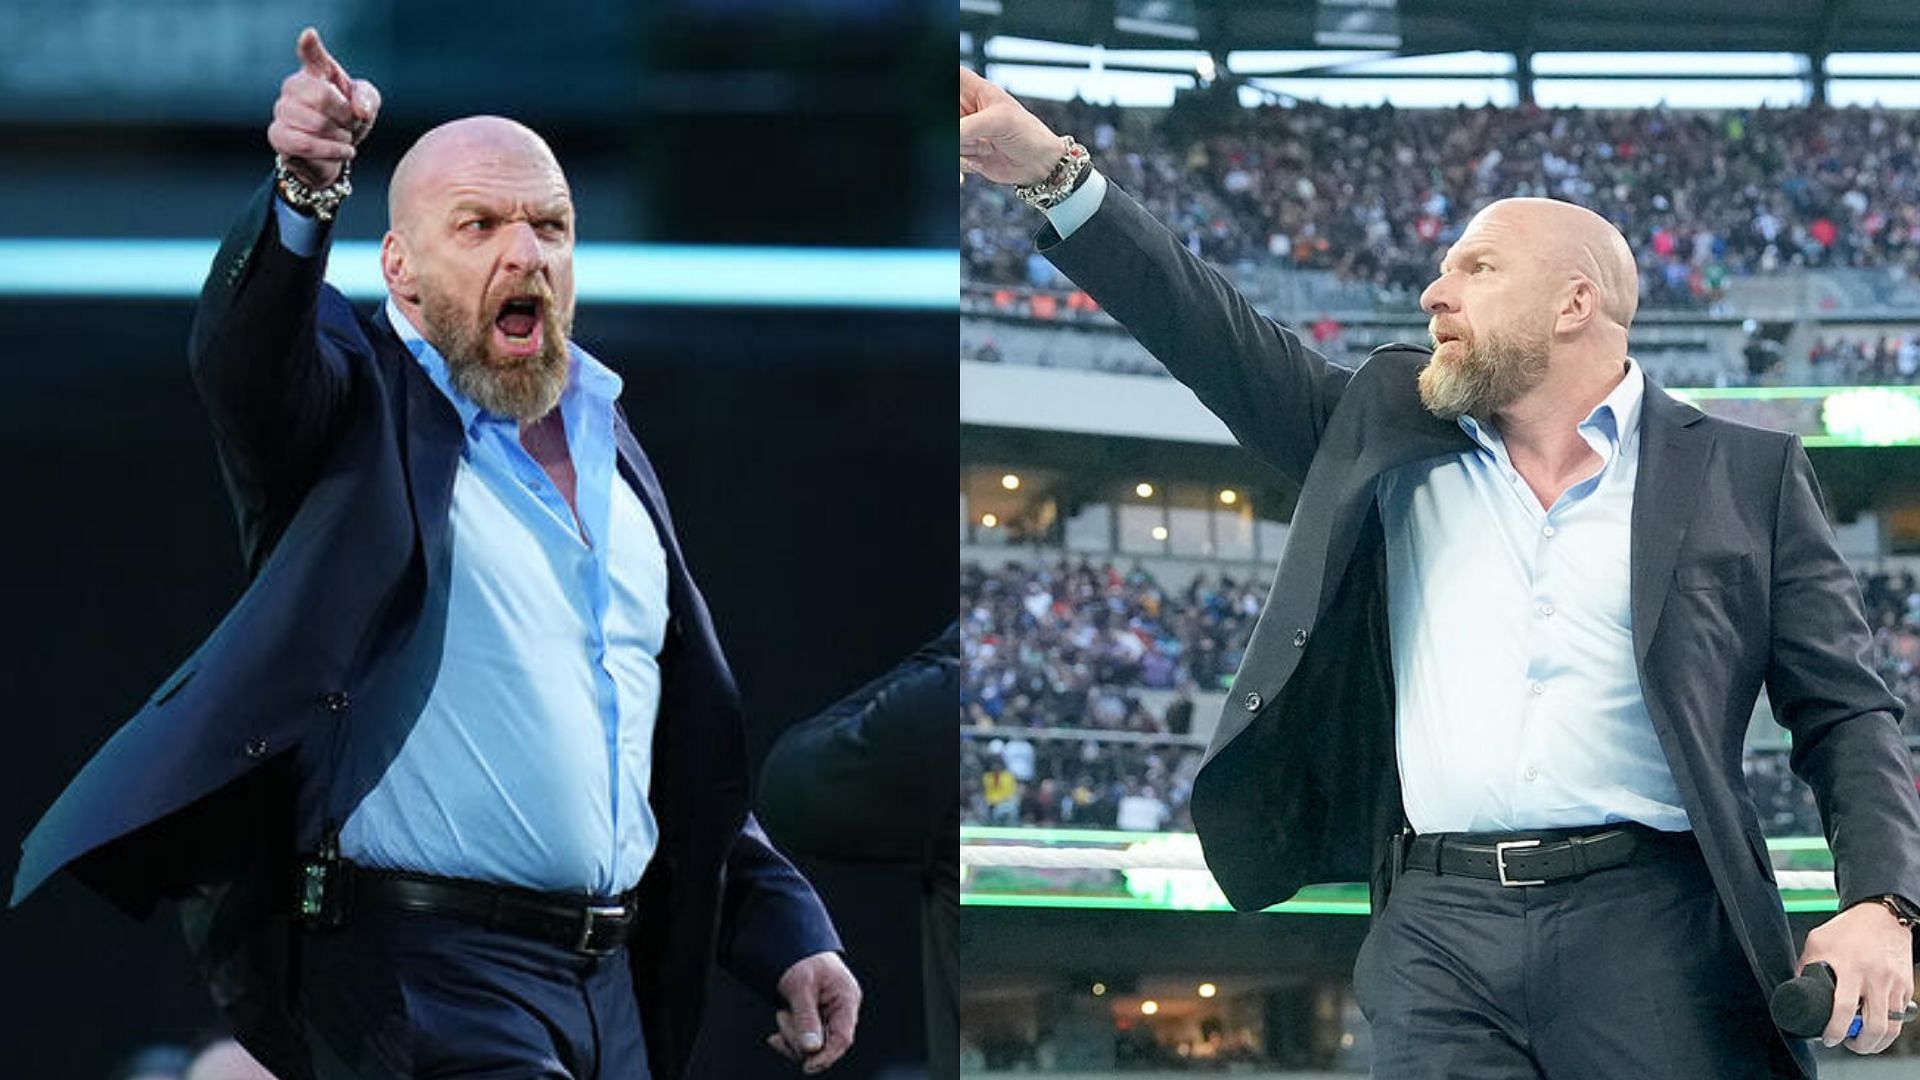 Triple H has made big changes to the company